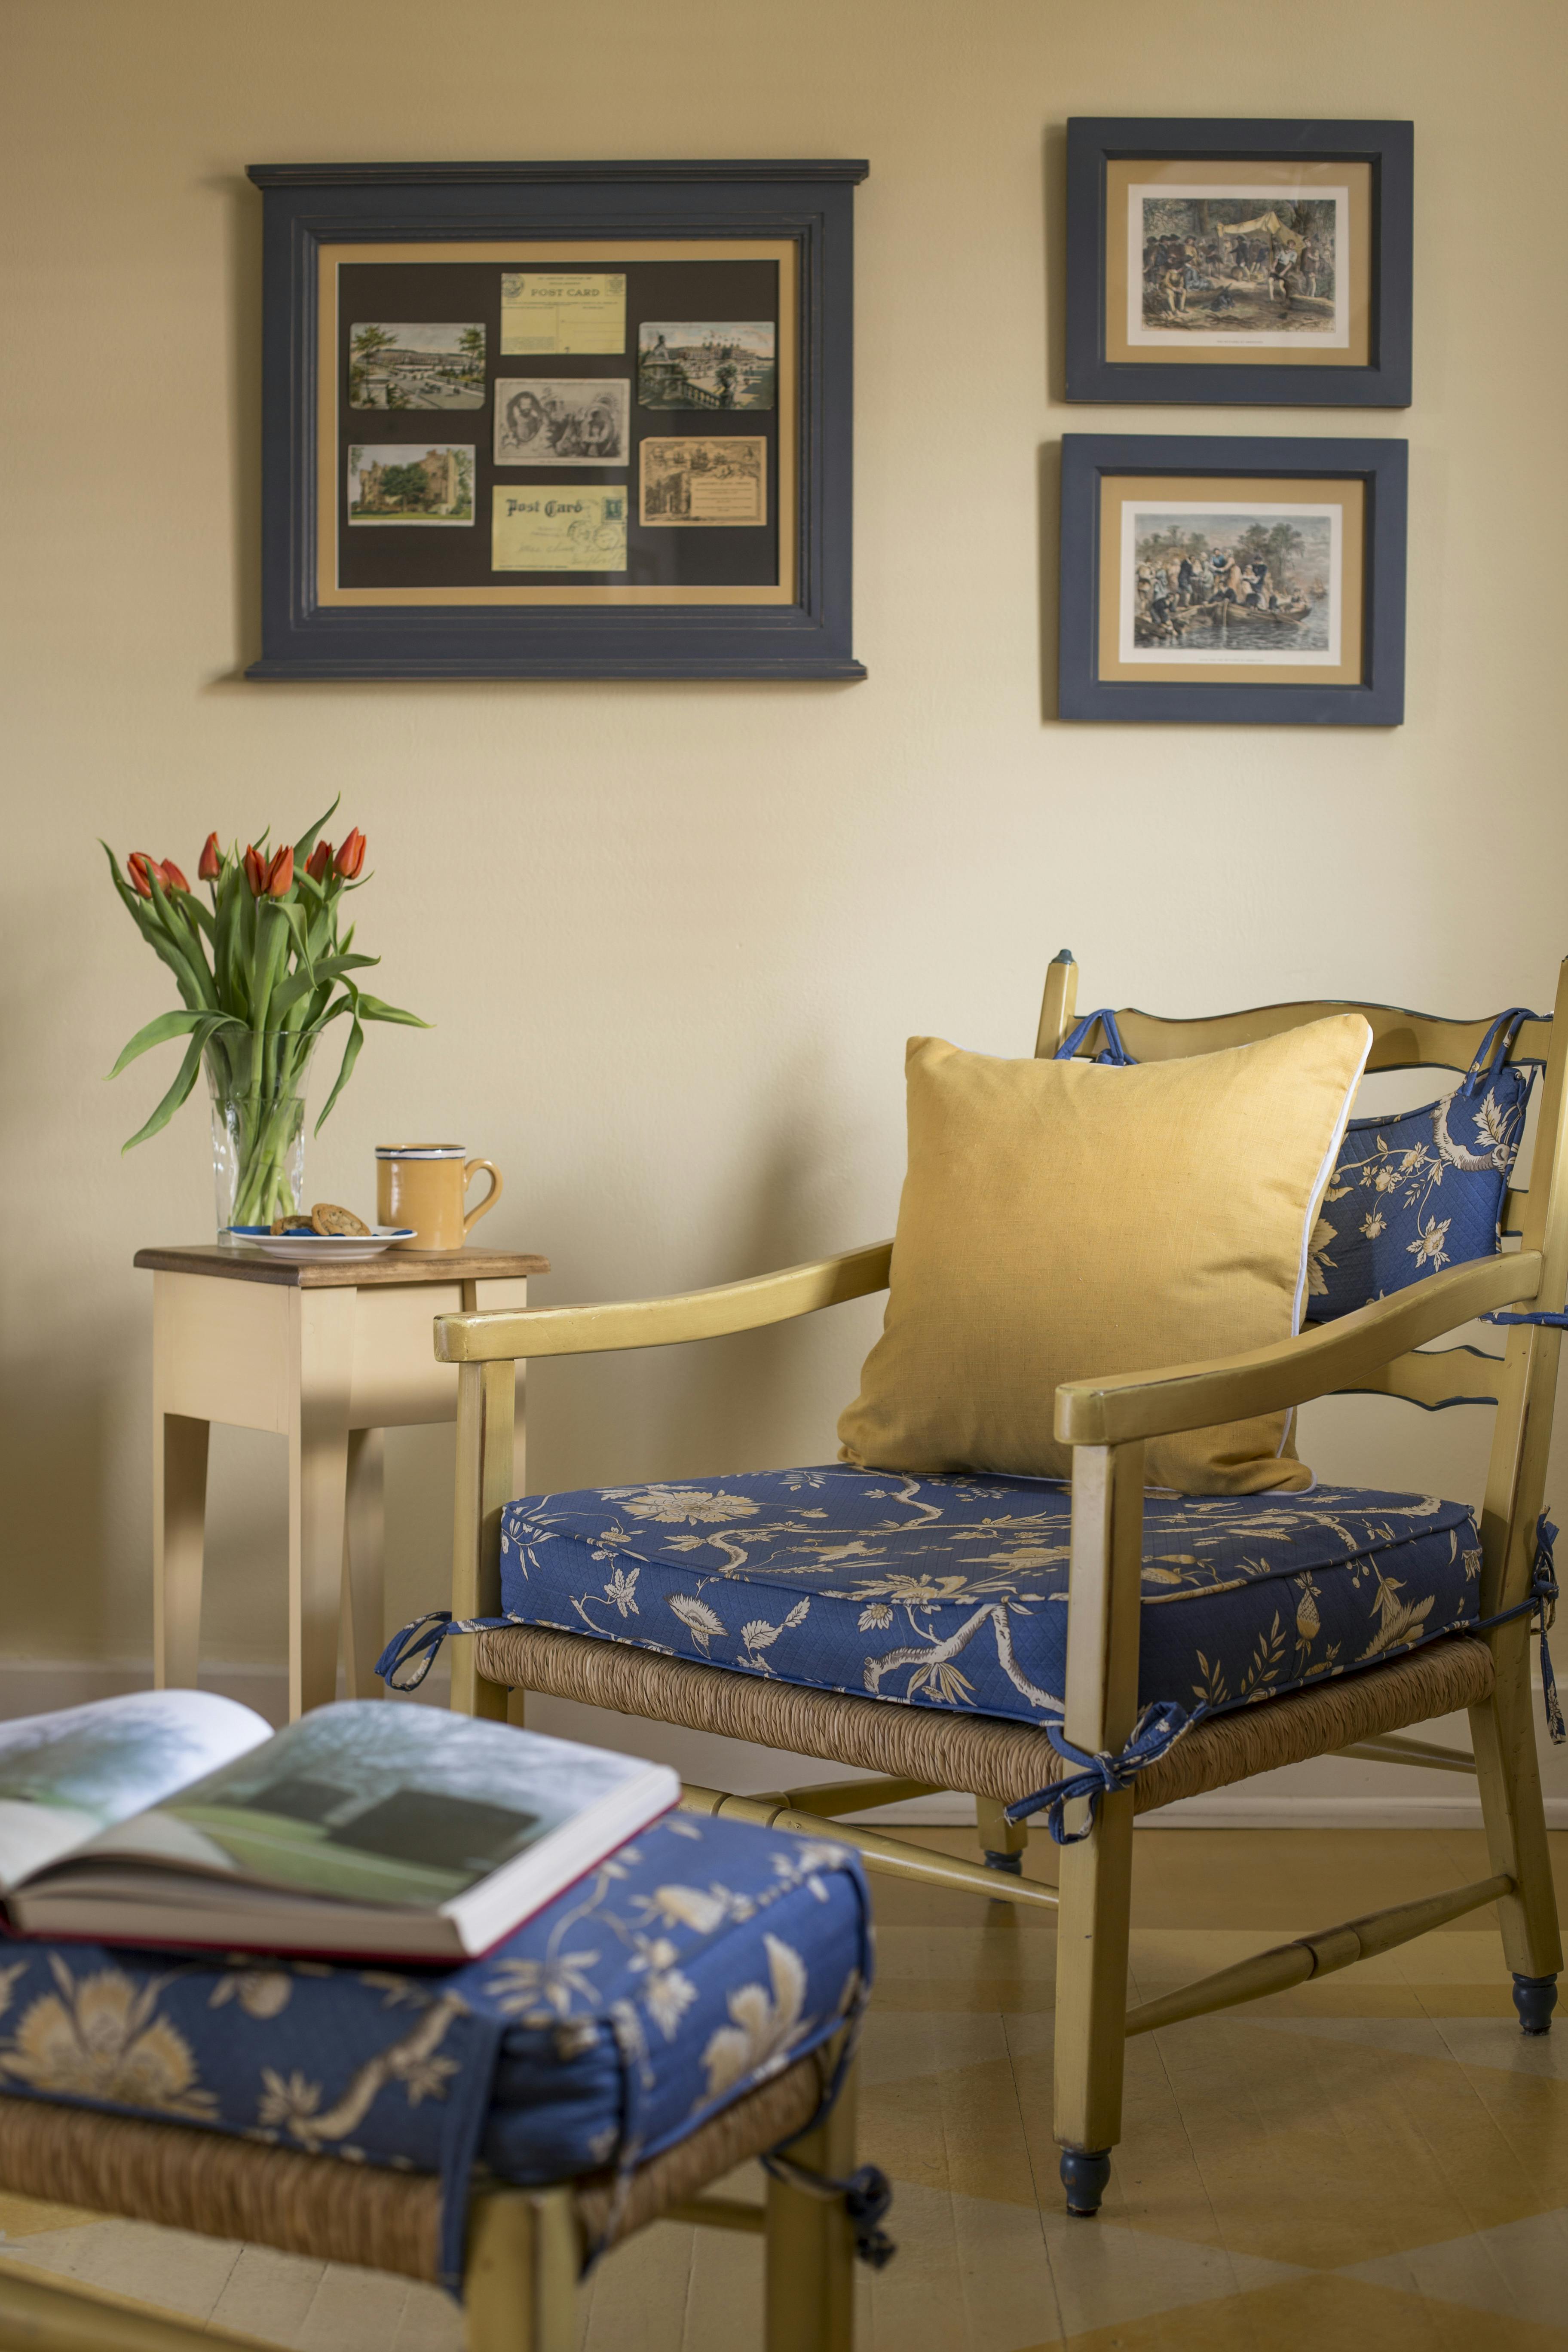 Wooden chair with blue and yellow cushions and matching footstool, small occasional table with mug and vase of tulips